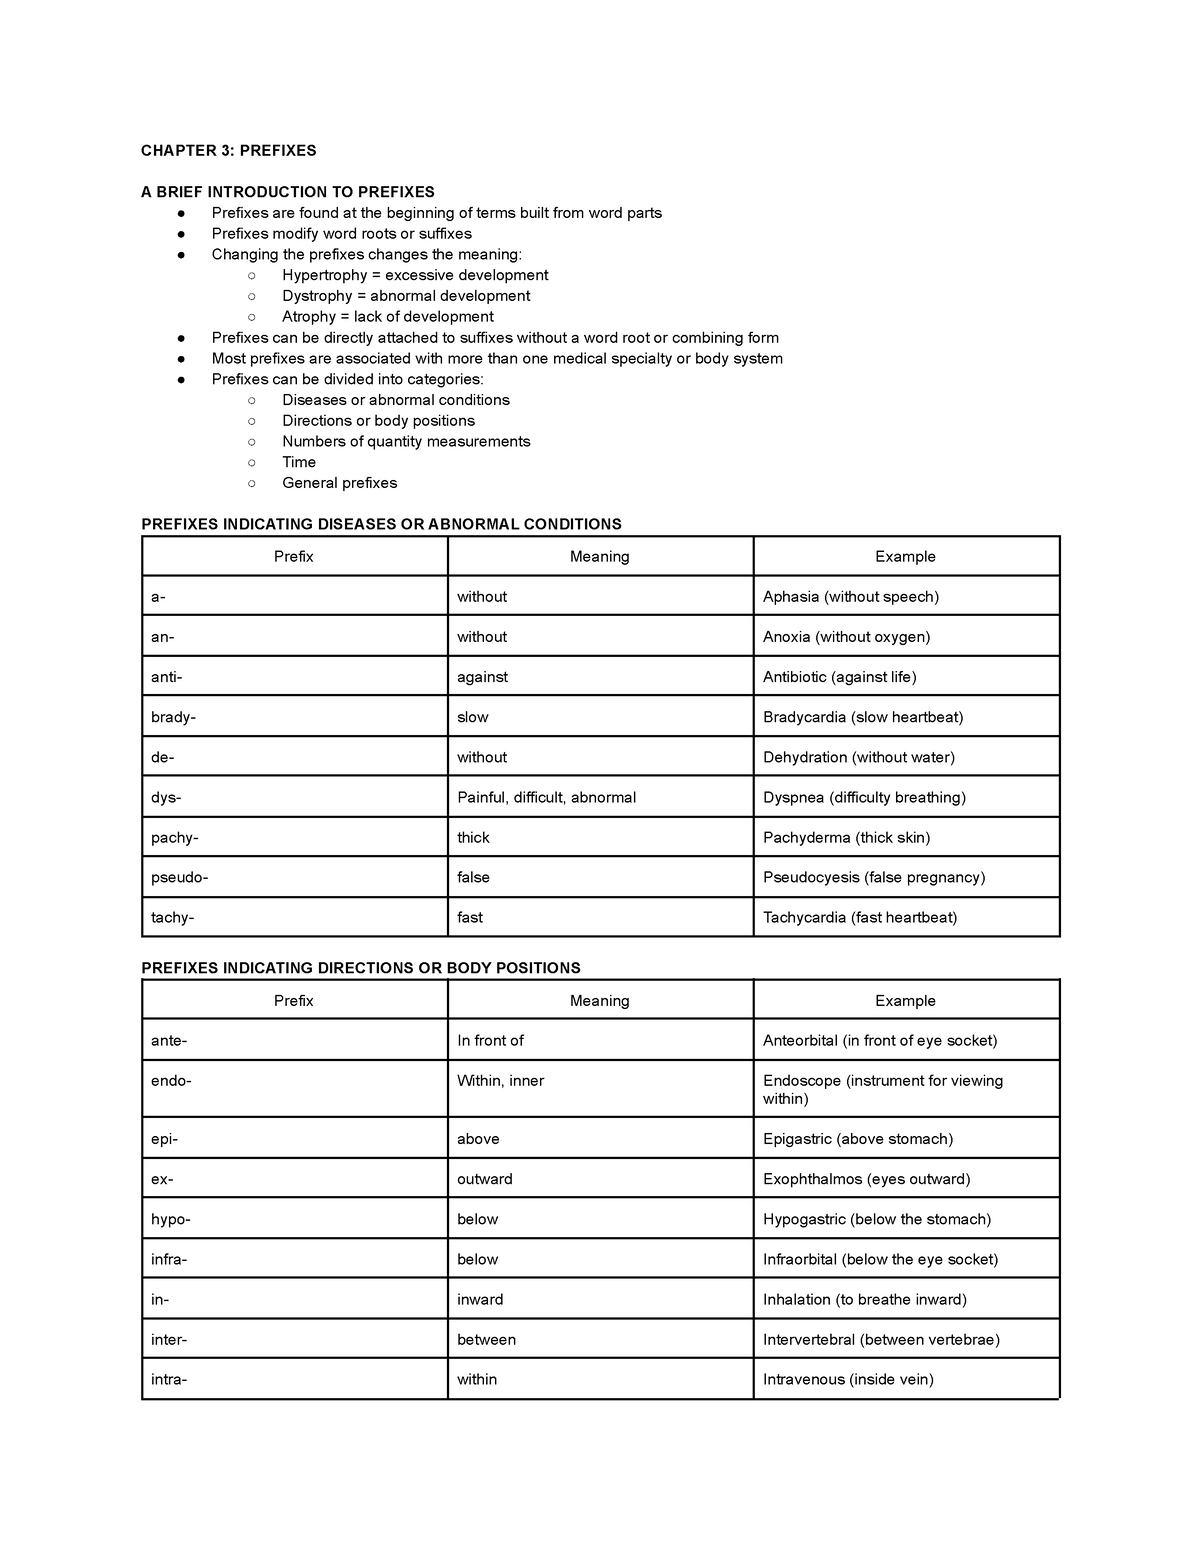 HSA 3534 Chp 3 Notes - CHAPTER 3: PREFIXES A BRIEF INTRODUCTION TO ...